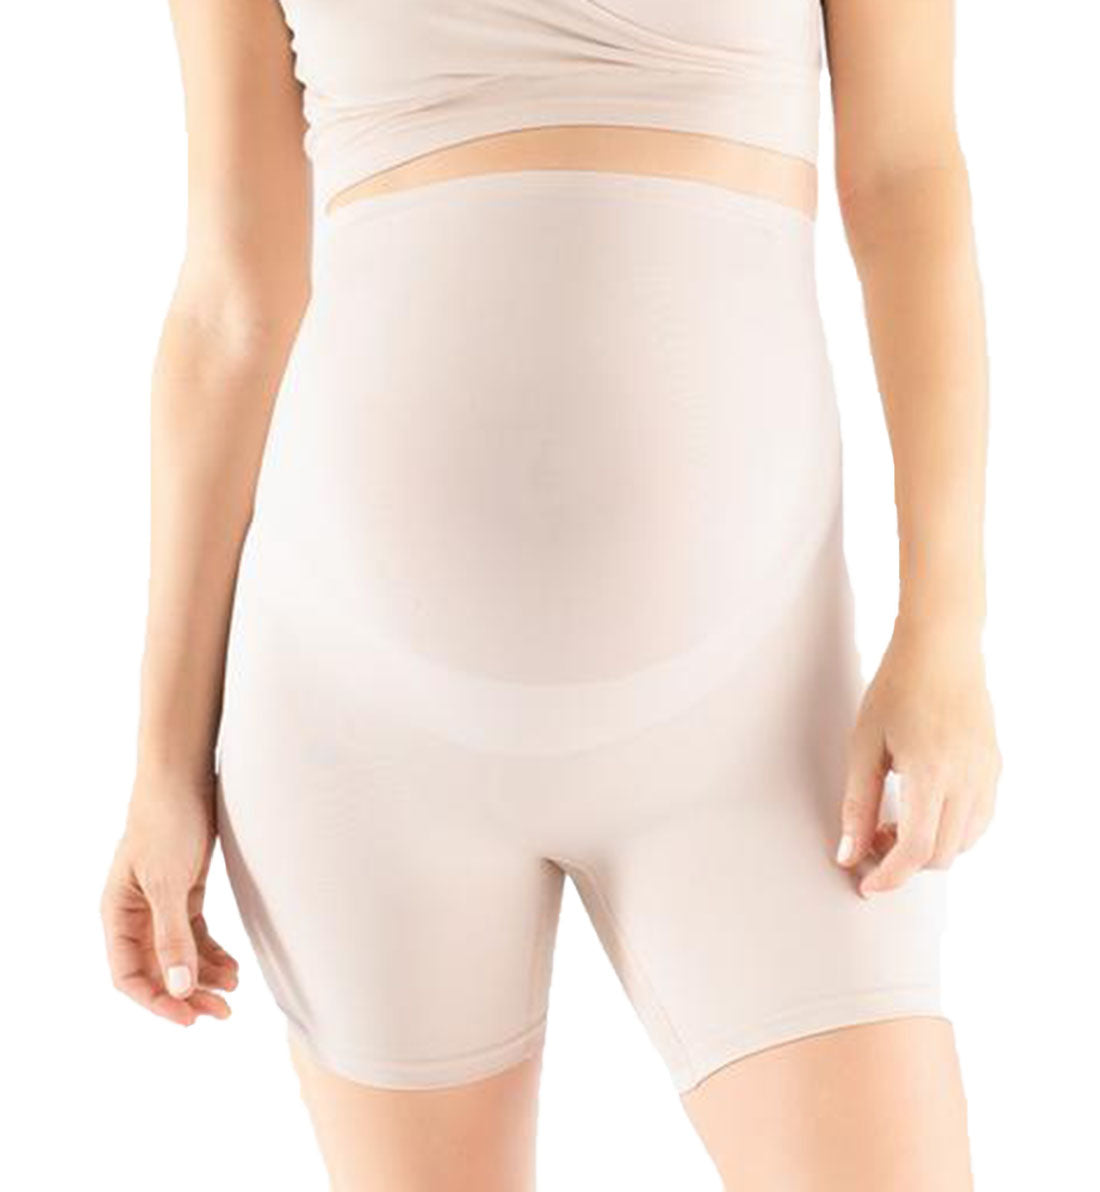 Belly Bandit Thighs Disguise Maternity Short (THIGHSD),Small,Nude - Nude,Small